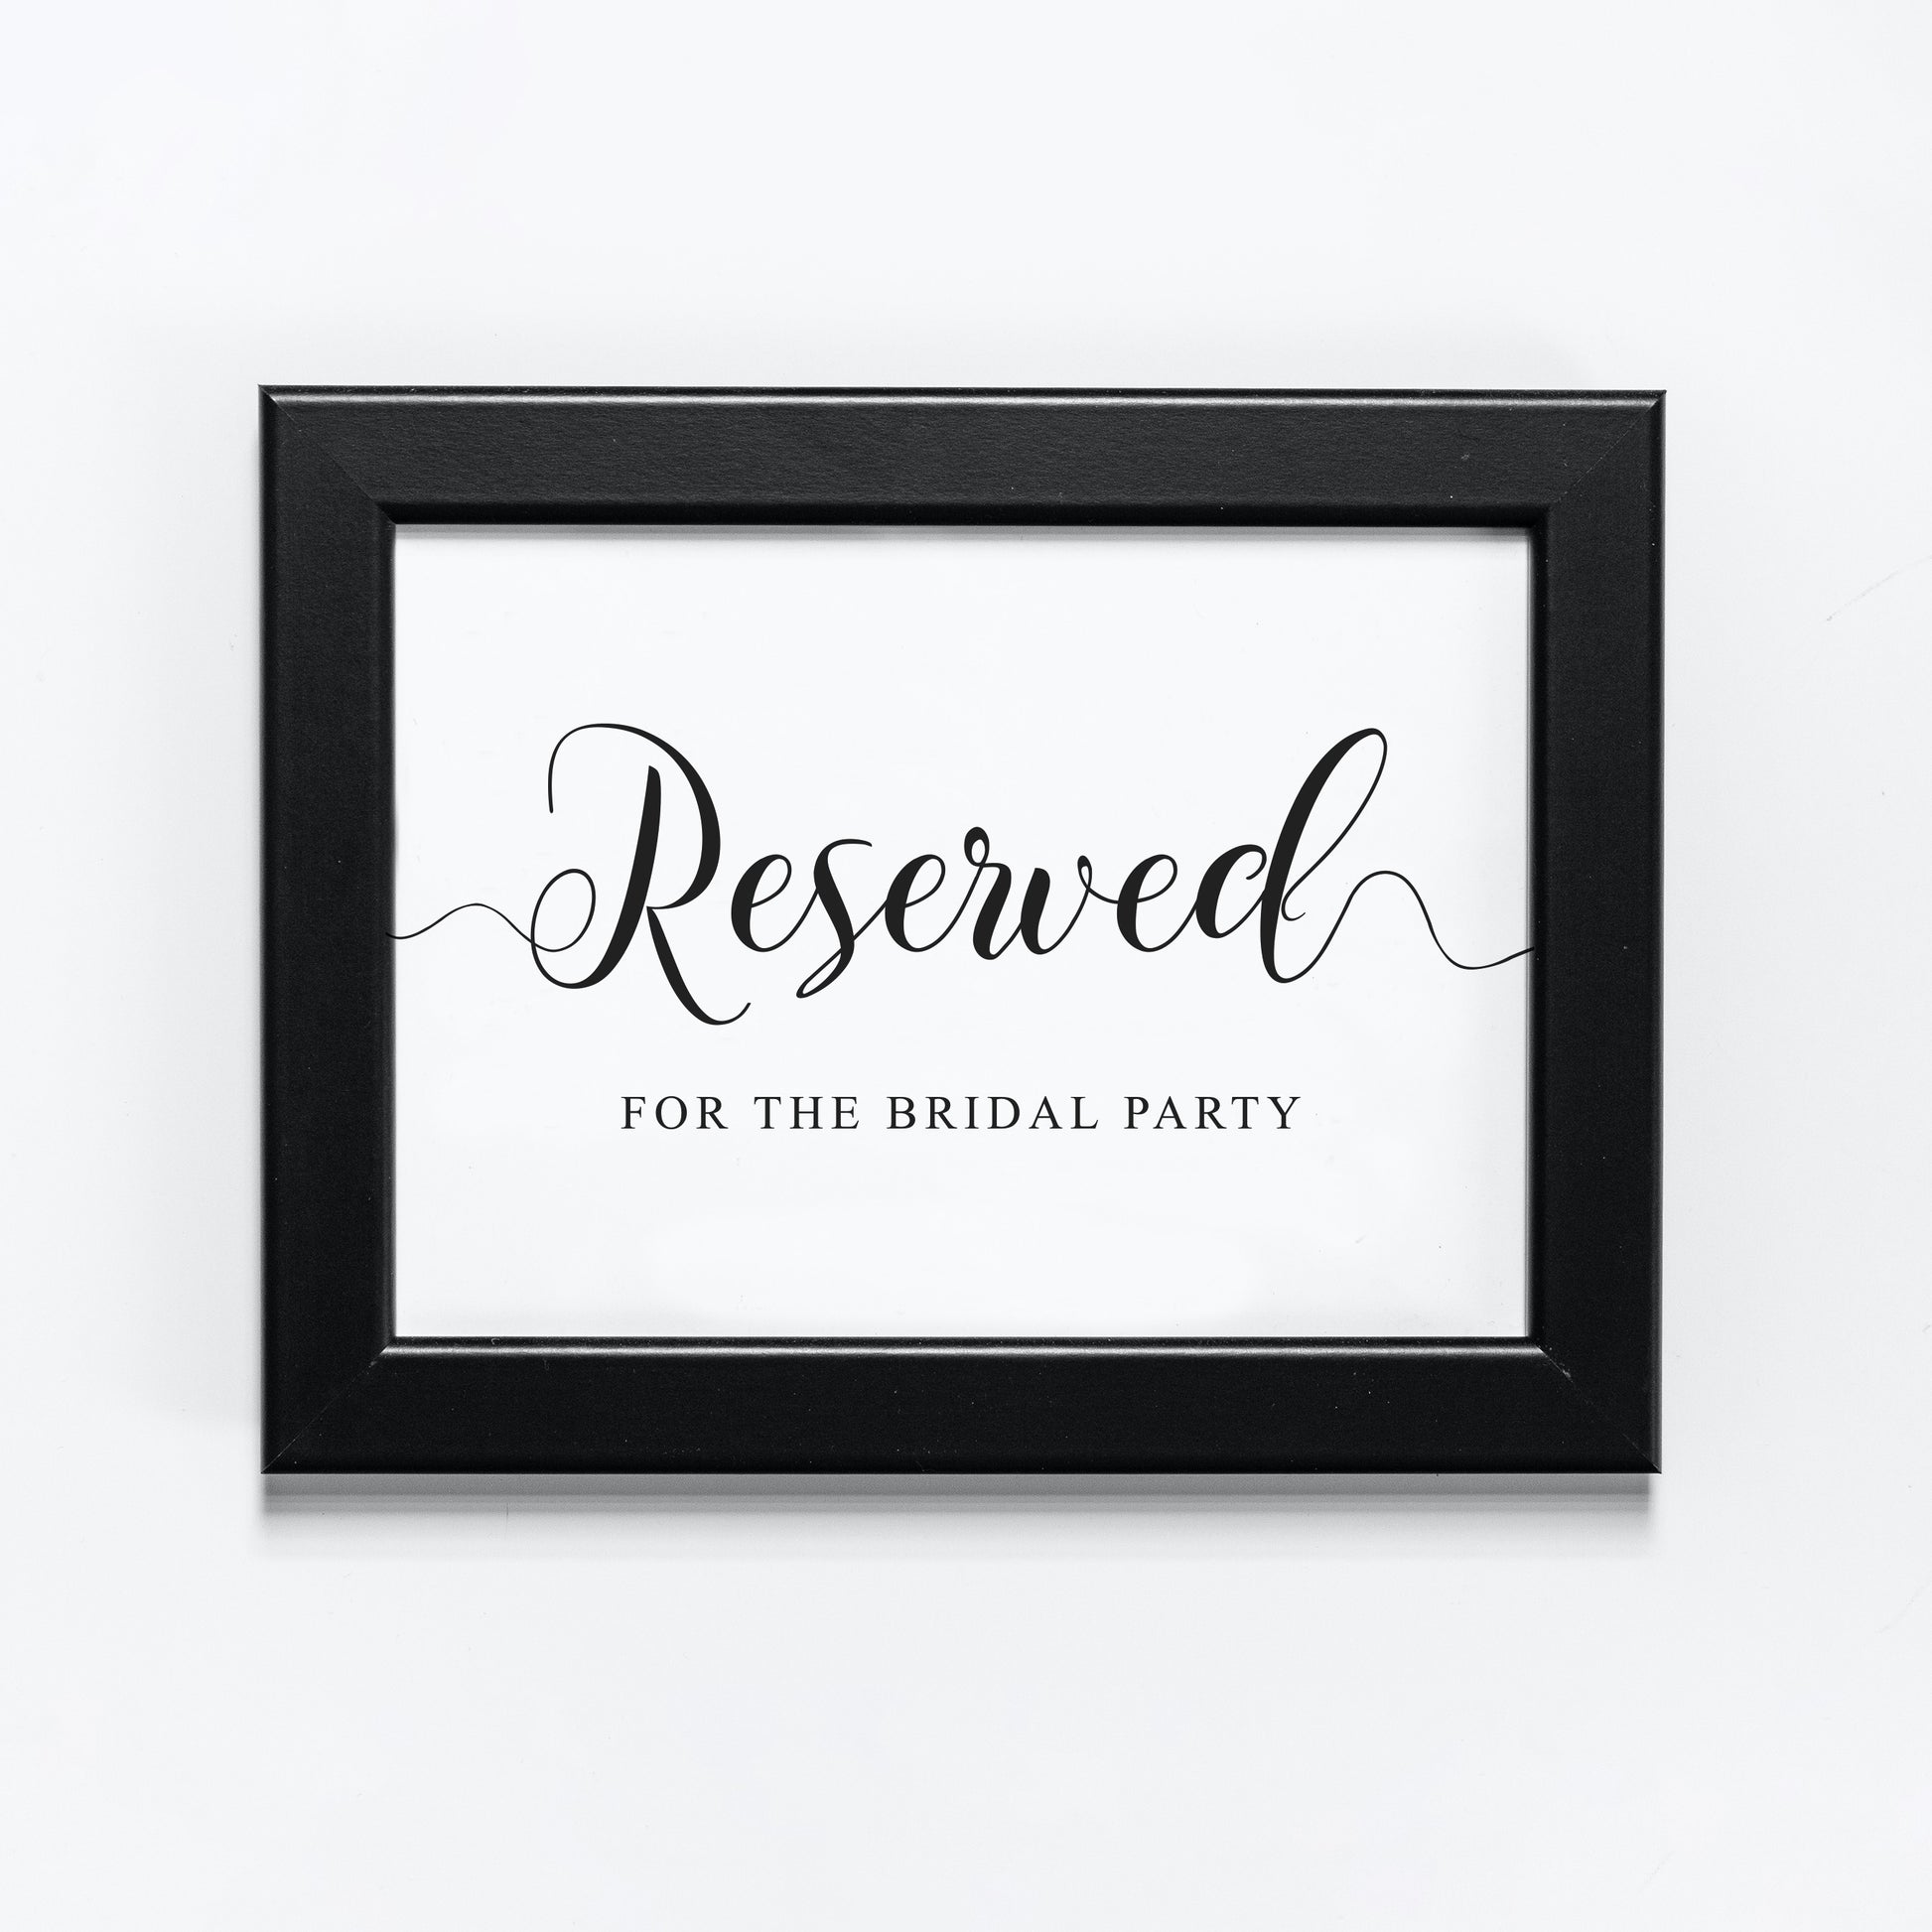 Reserved for the bridal party sign in a black frame